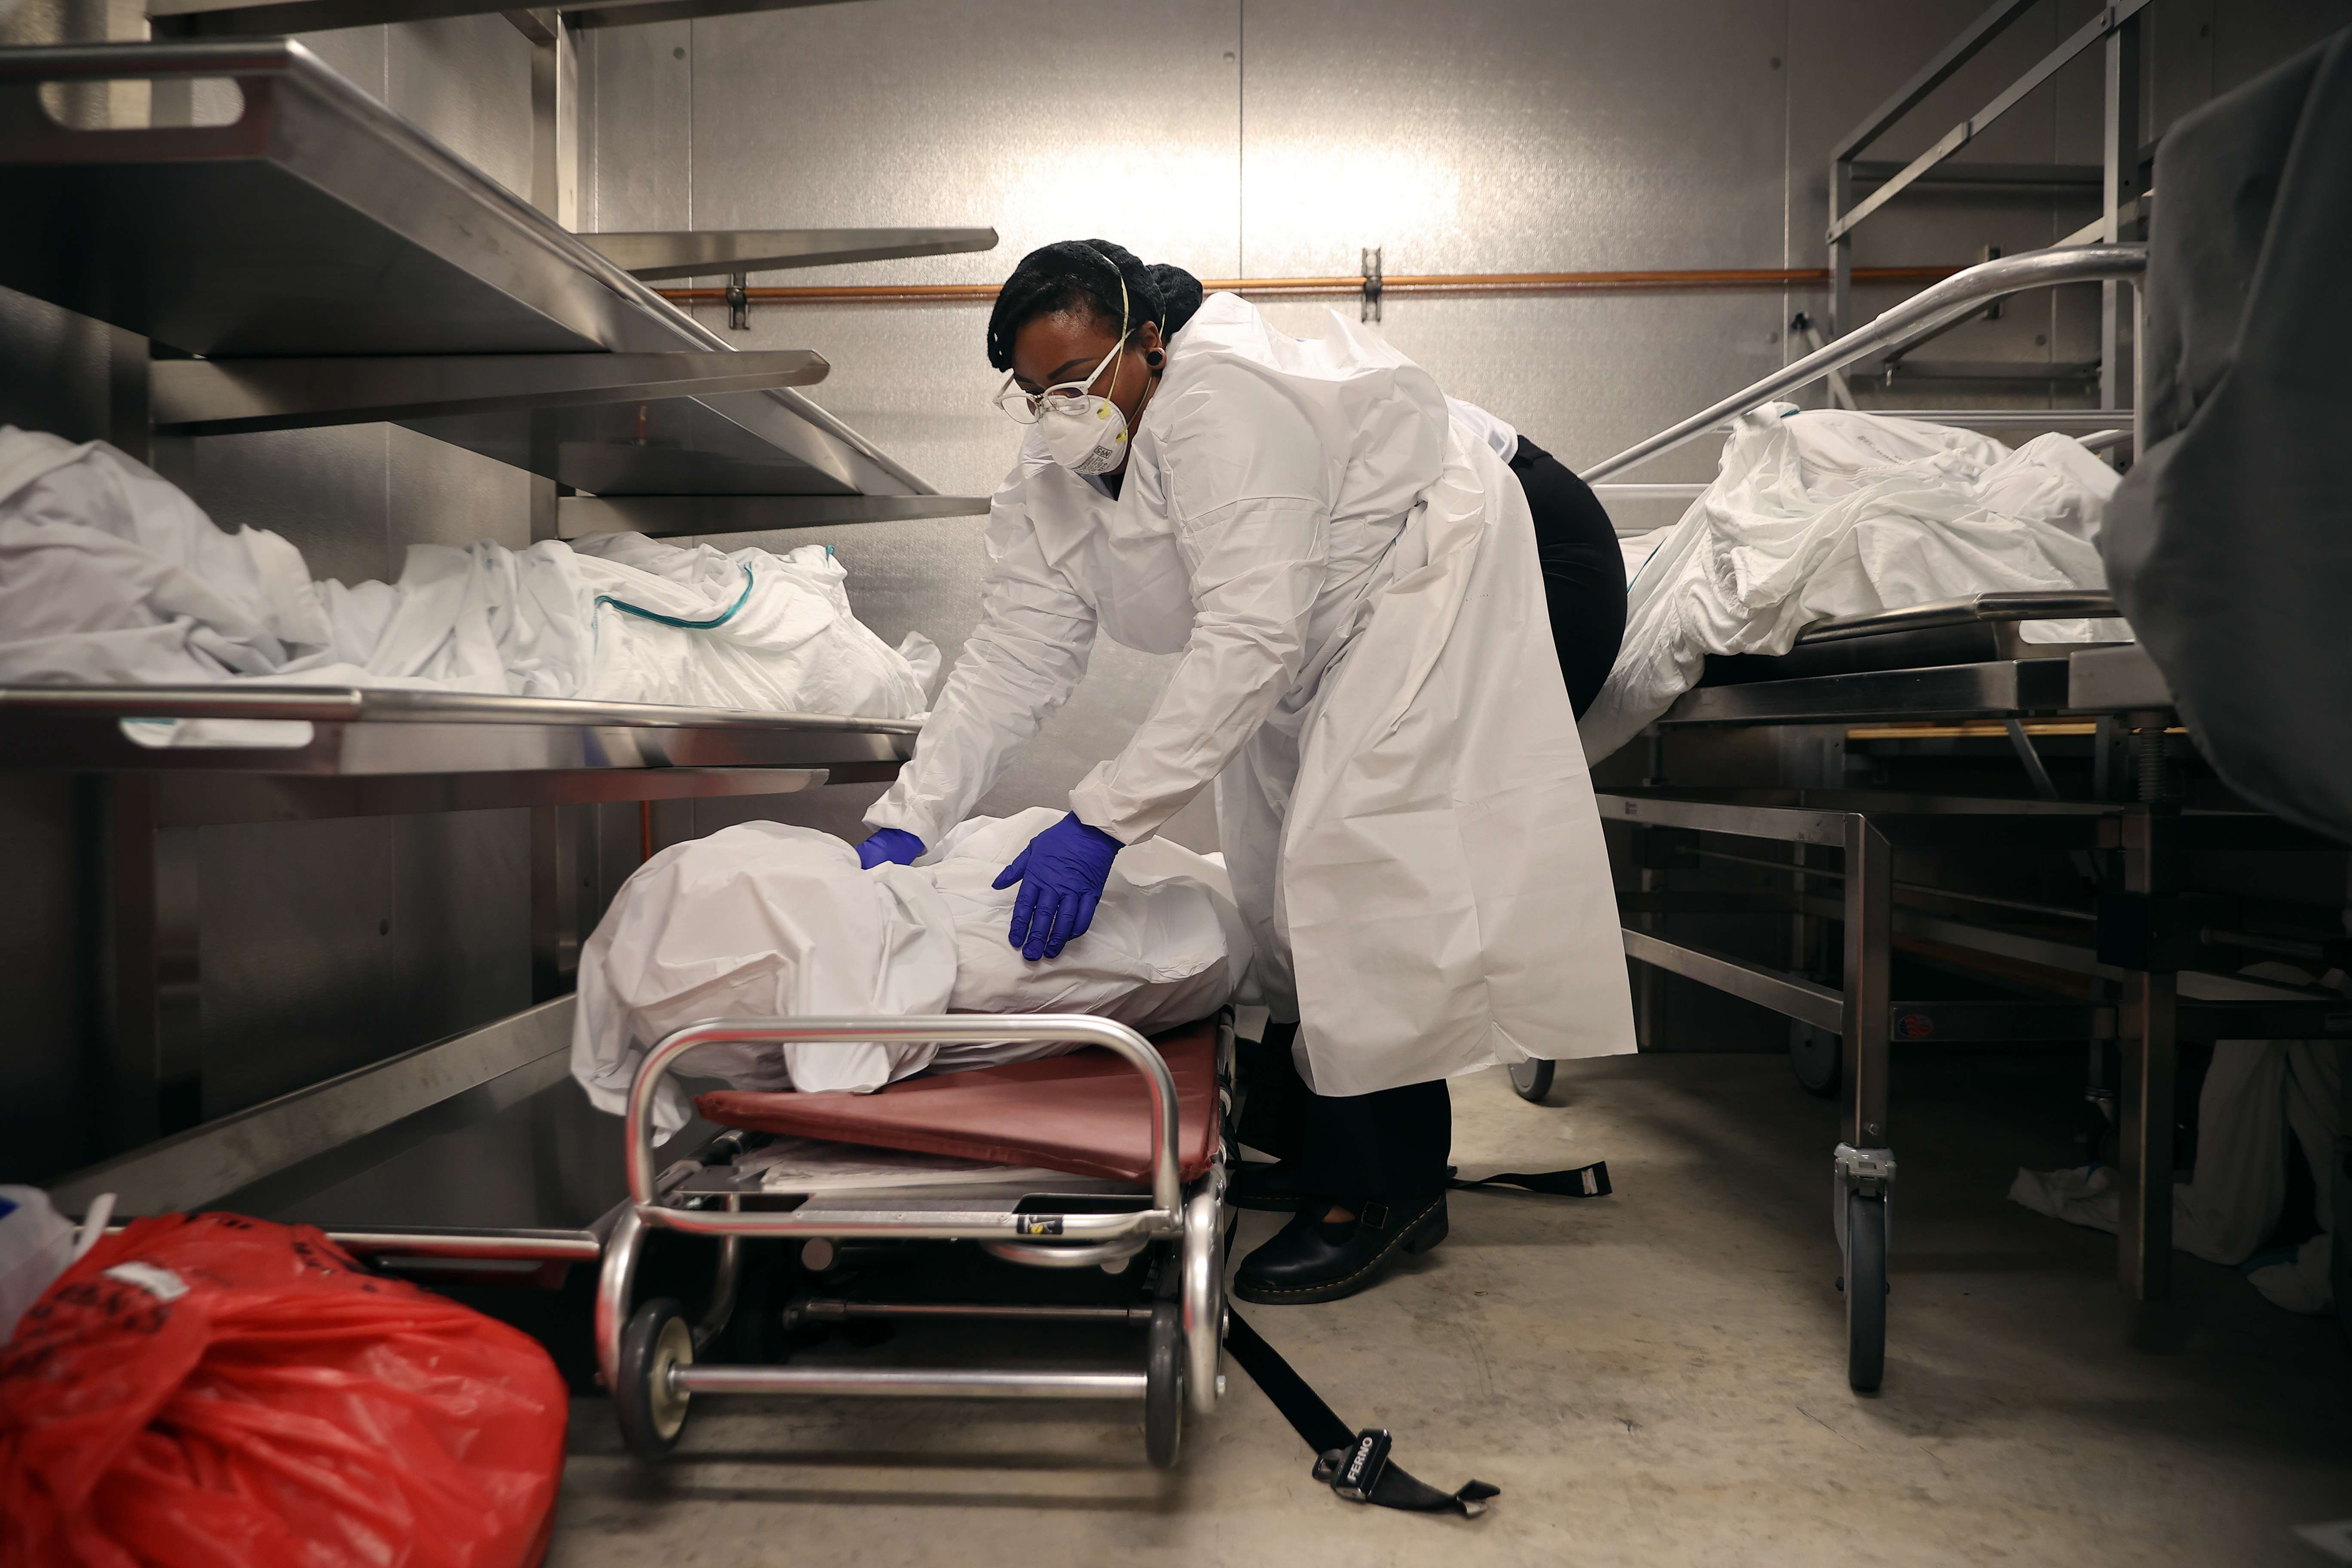 A worker wearing a mask, surgical gown, and gloves places a body wrapped in a sheet onto a stretcher inside a morgue.